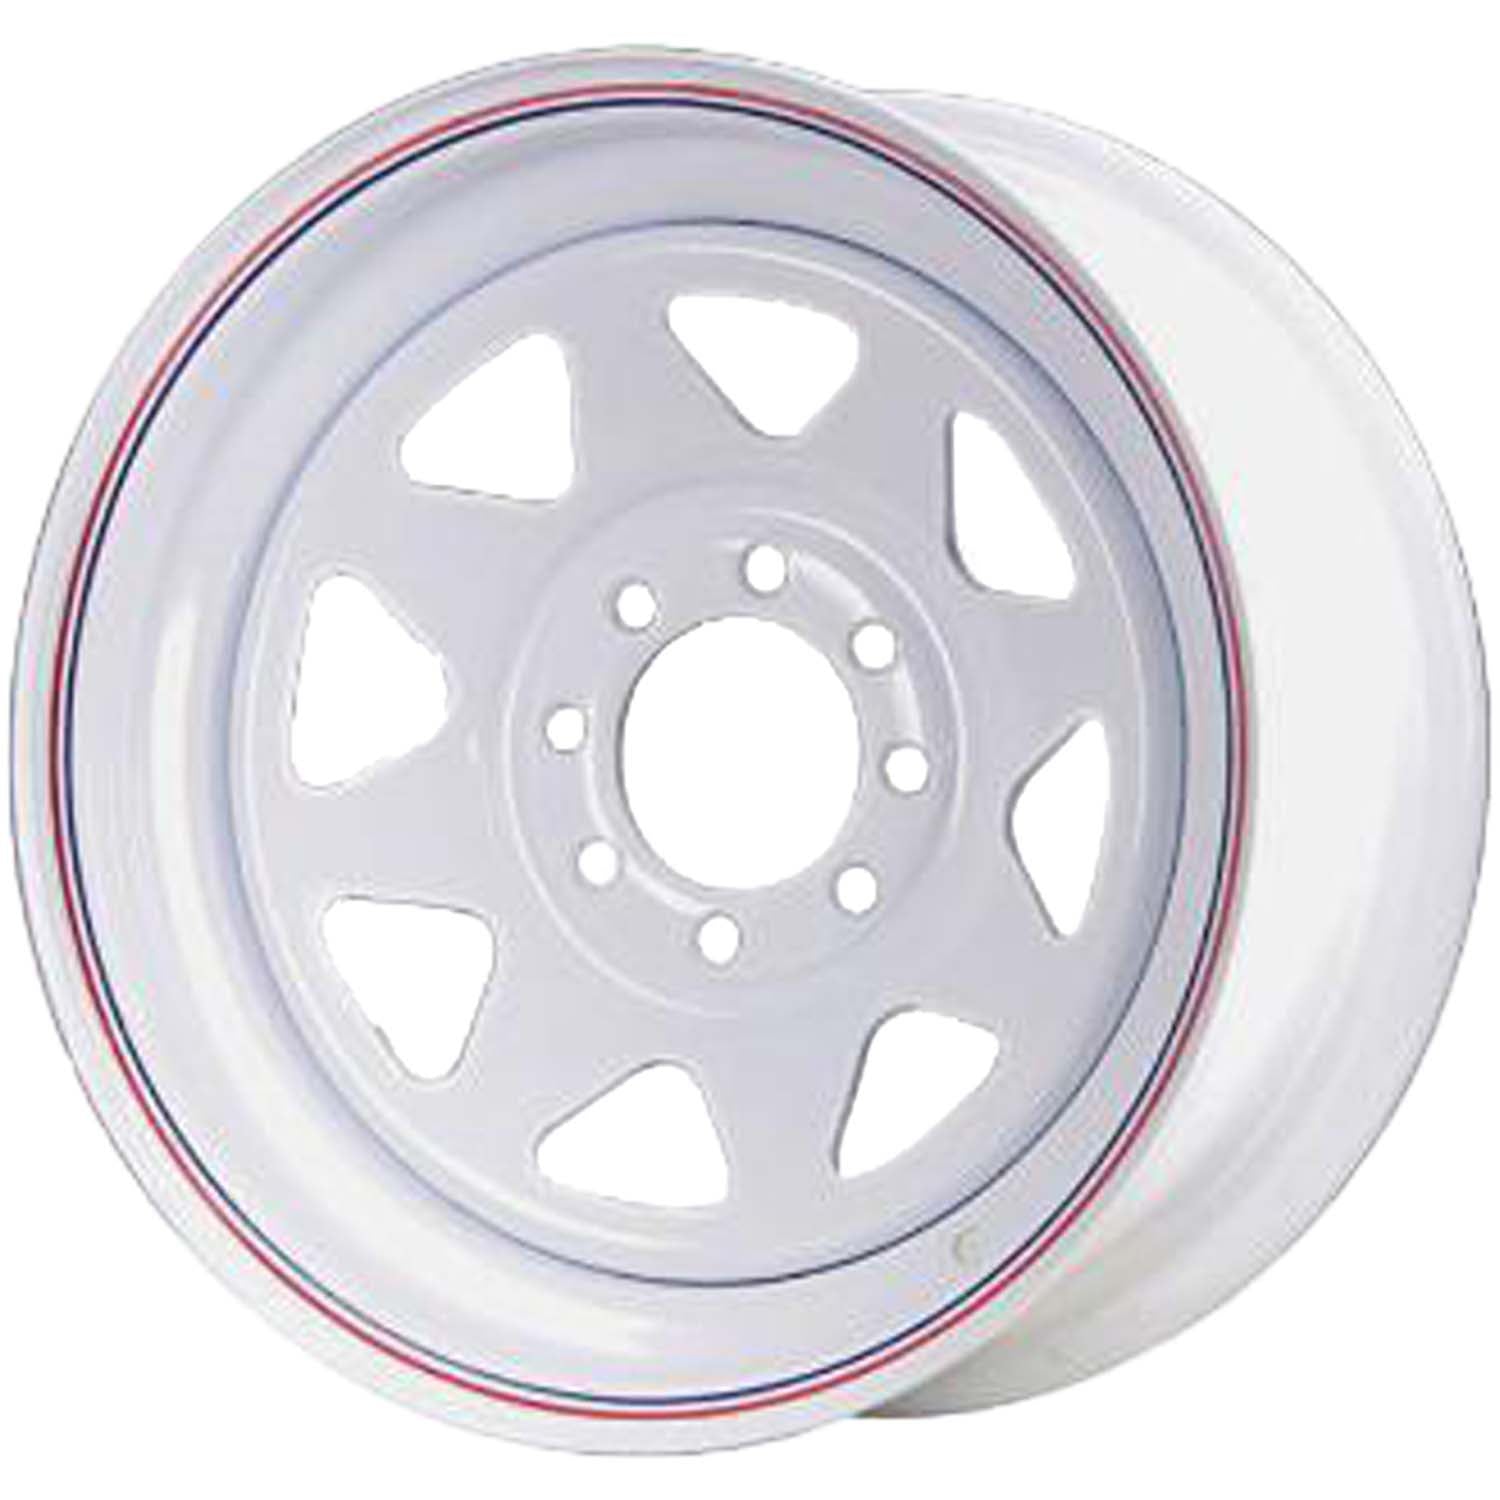 16x6 8 On 6.5 Spoked Steel Trailer Wheel - White with Pin Stripes